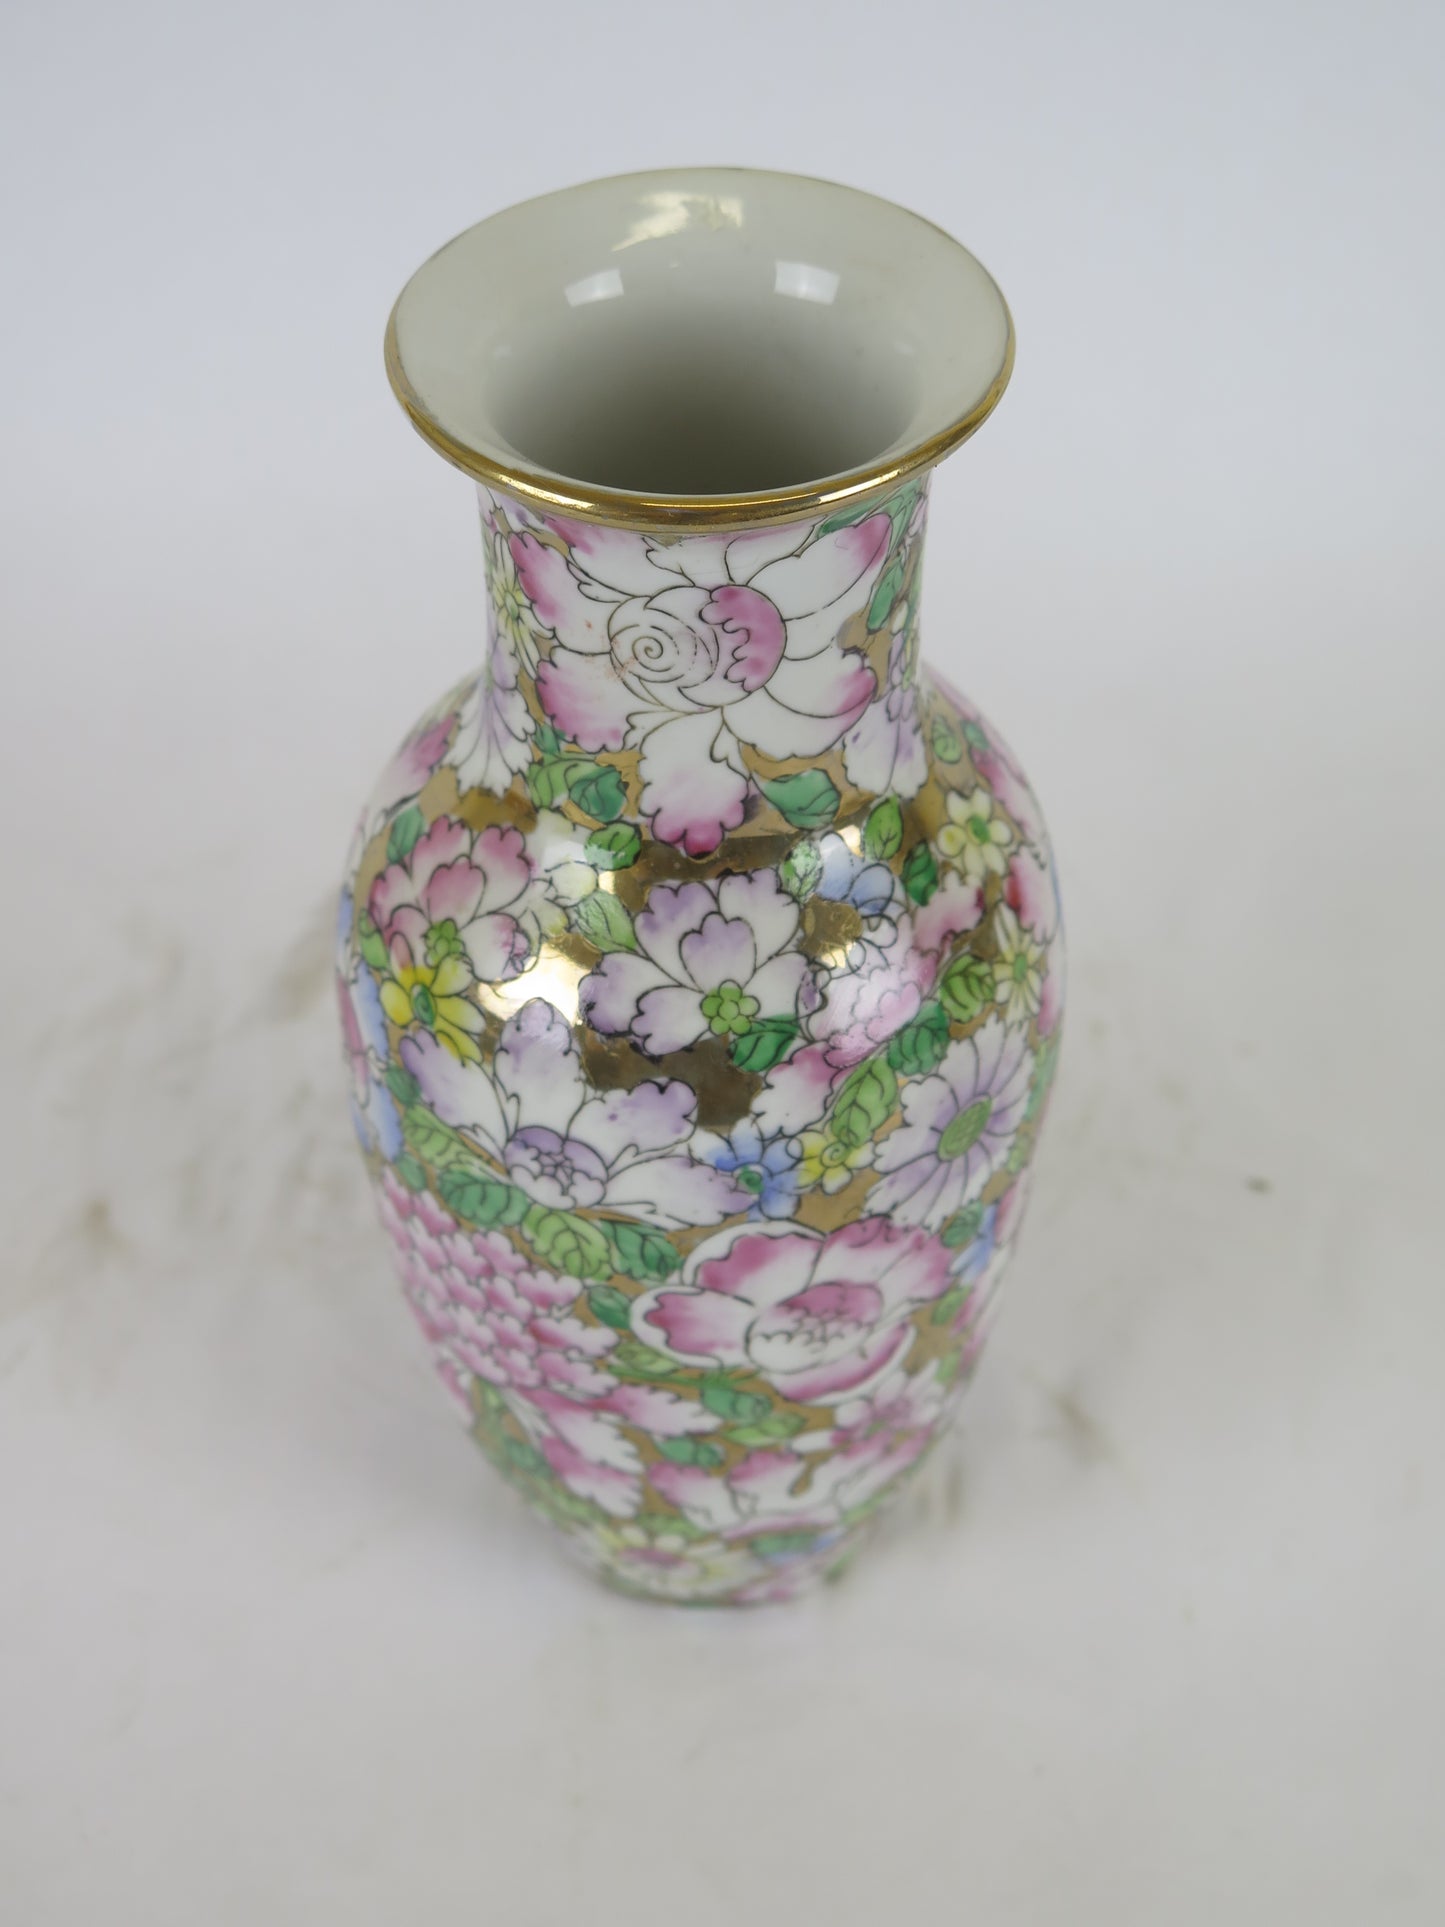 Old hand painted vintage ceramic vase with floral motifs Chinese ceramic vase for flowers China high quality hand painted CM8